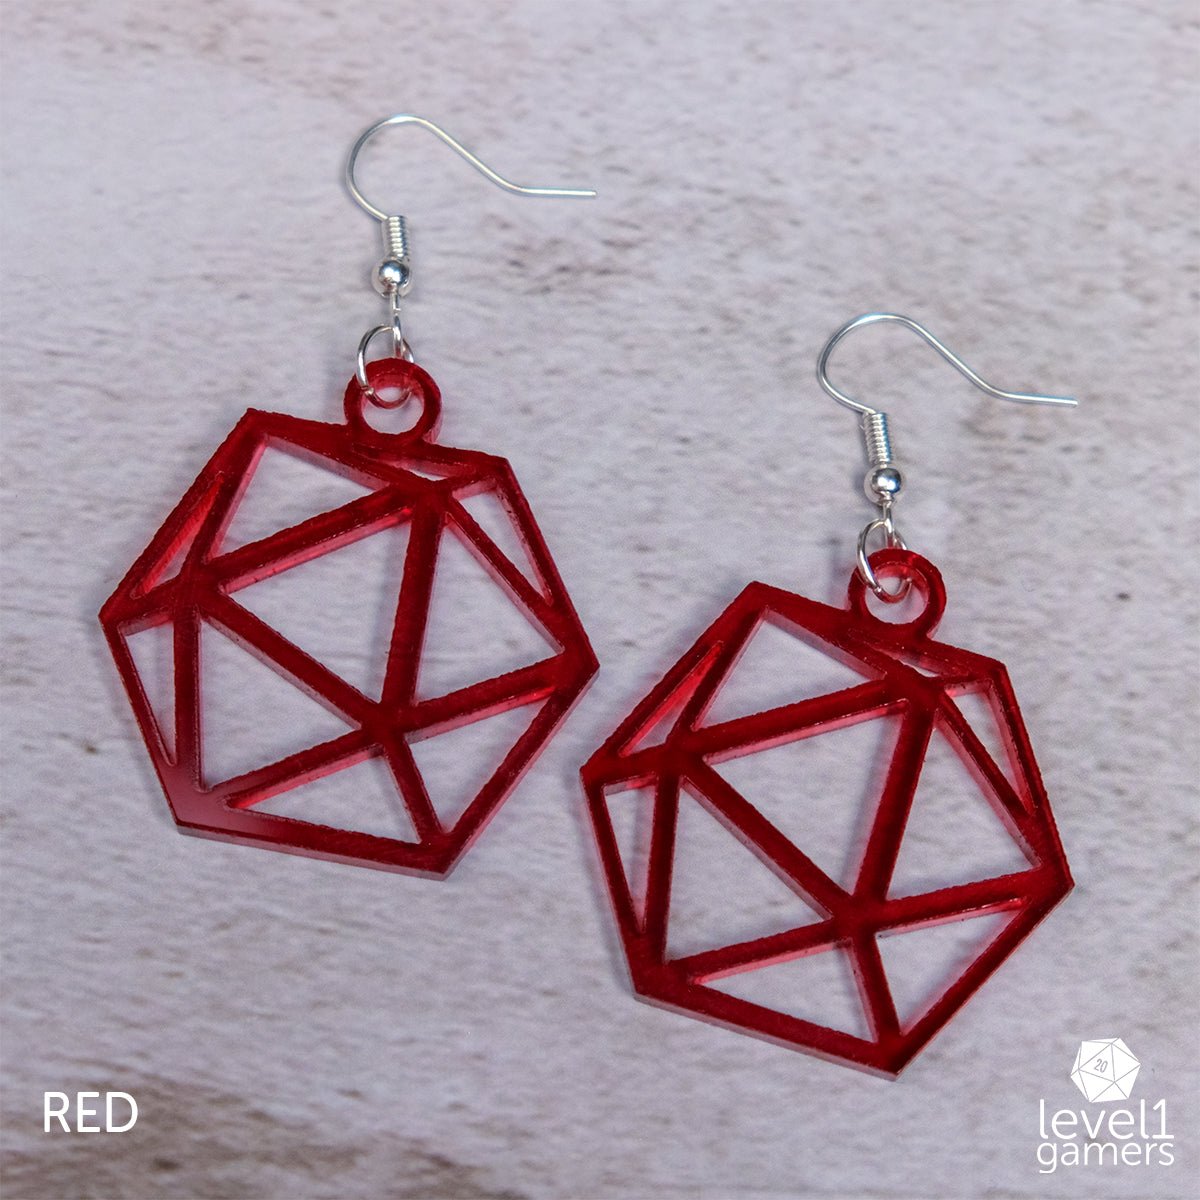 D20 Acrylic Earrings  Level 1 Gamers Pendant Red 